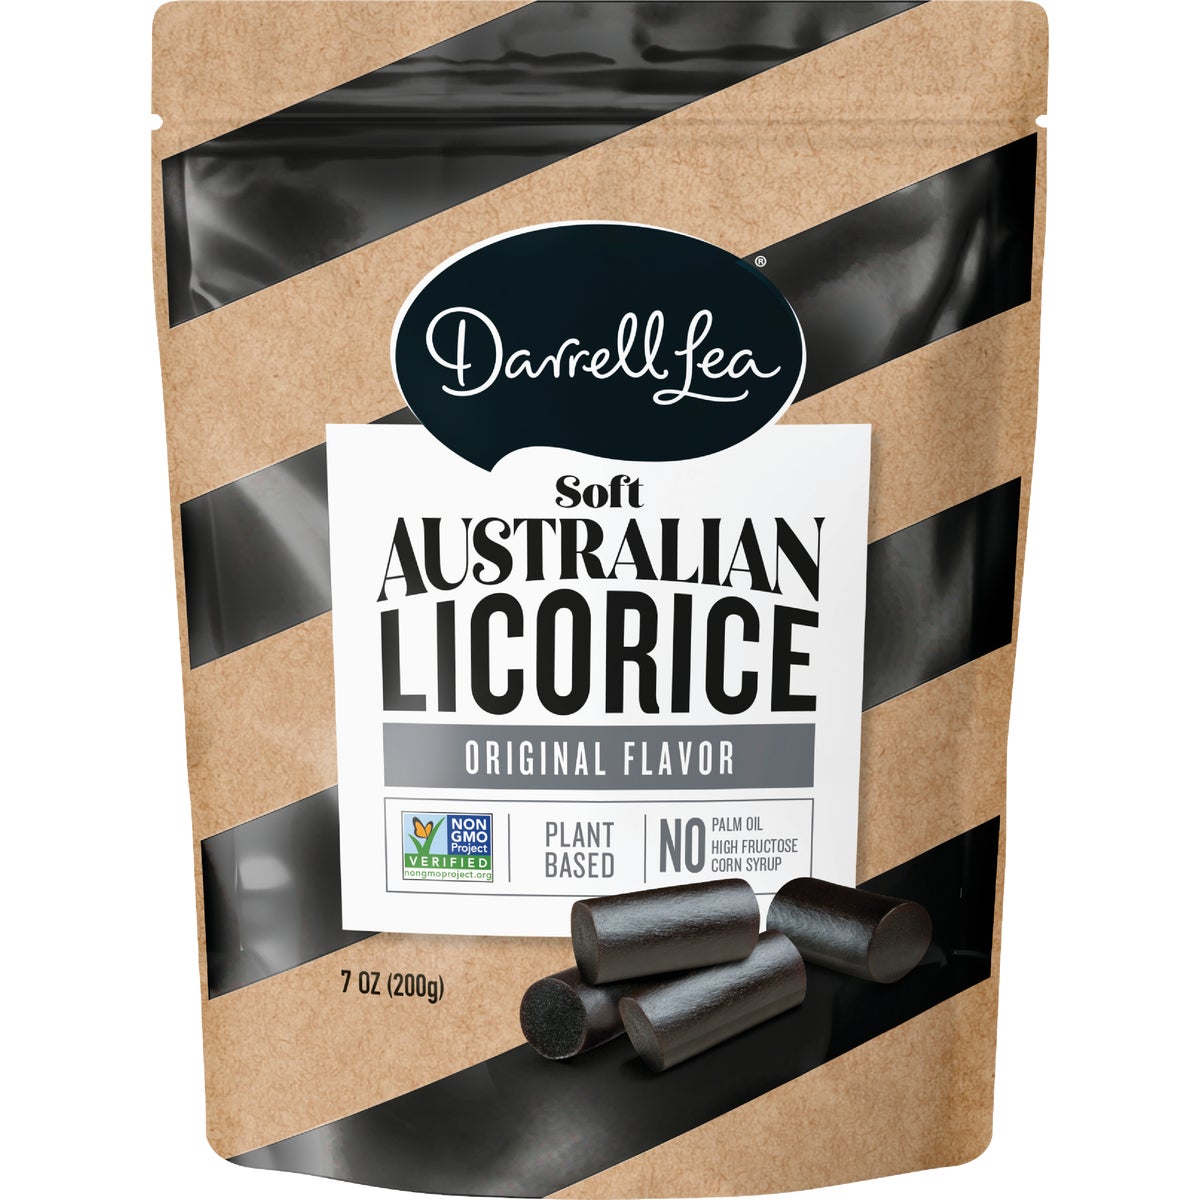 Item 971322, Soft and chewy Australian style licorice.